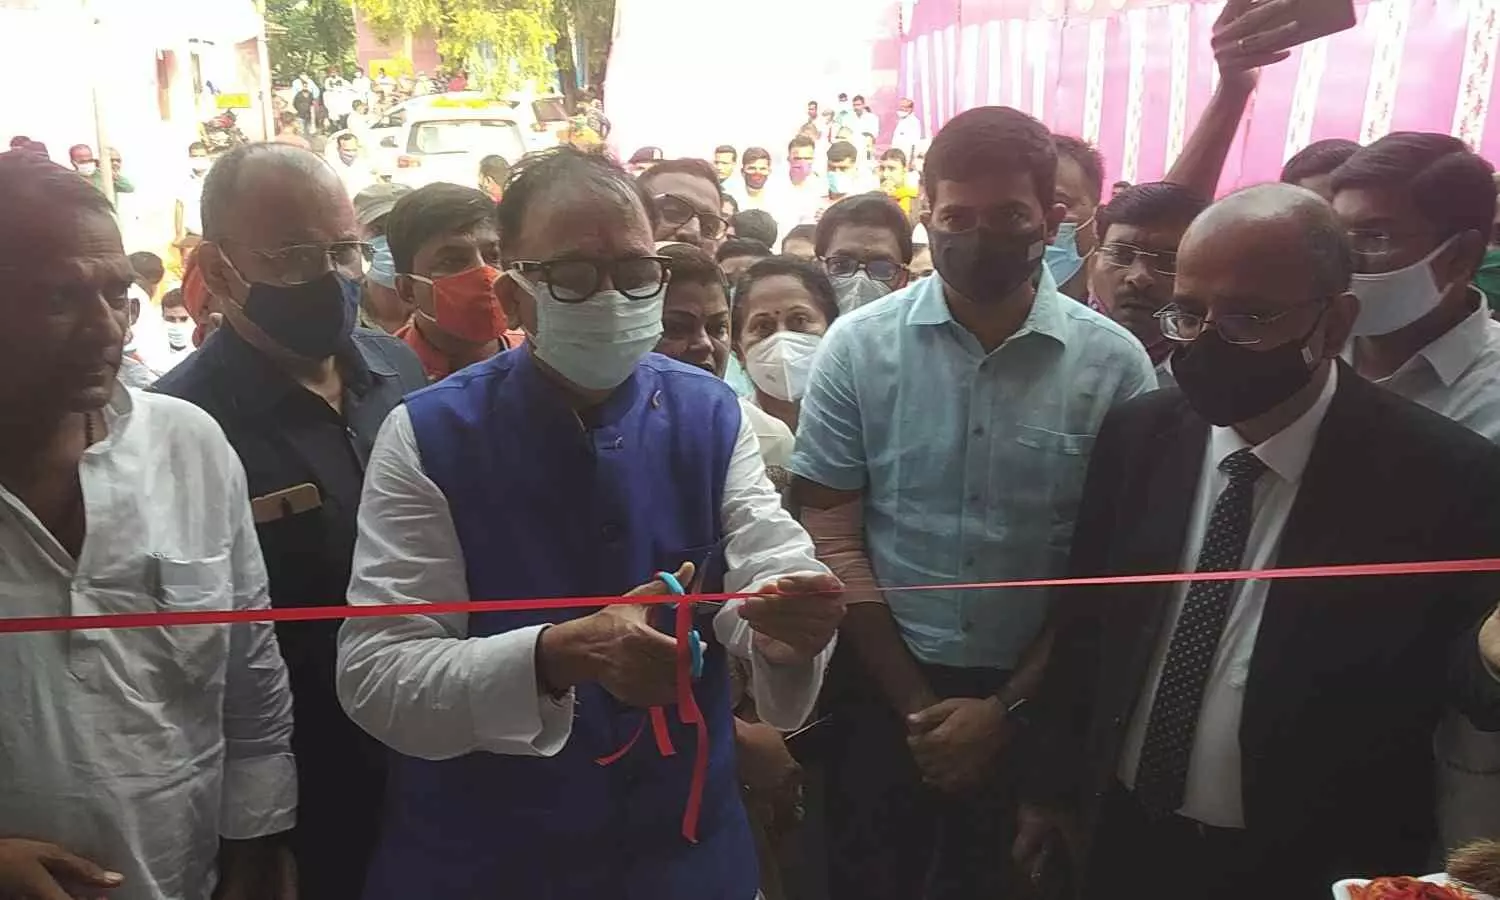 Union Minister of Heavy Industries Mahendra Nath Pandey inaugurated the Oxygen Plant